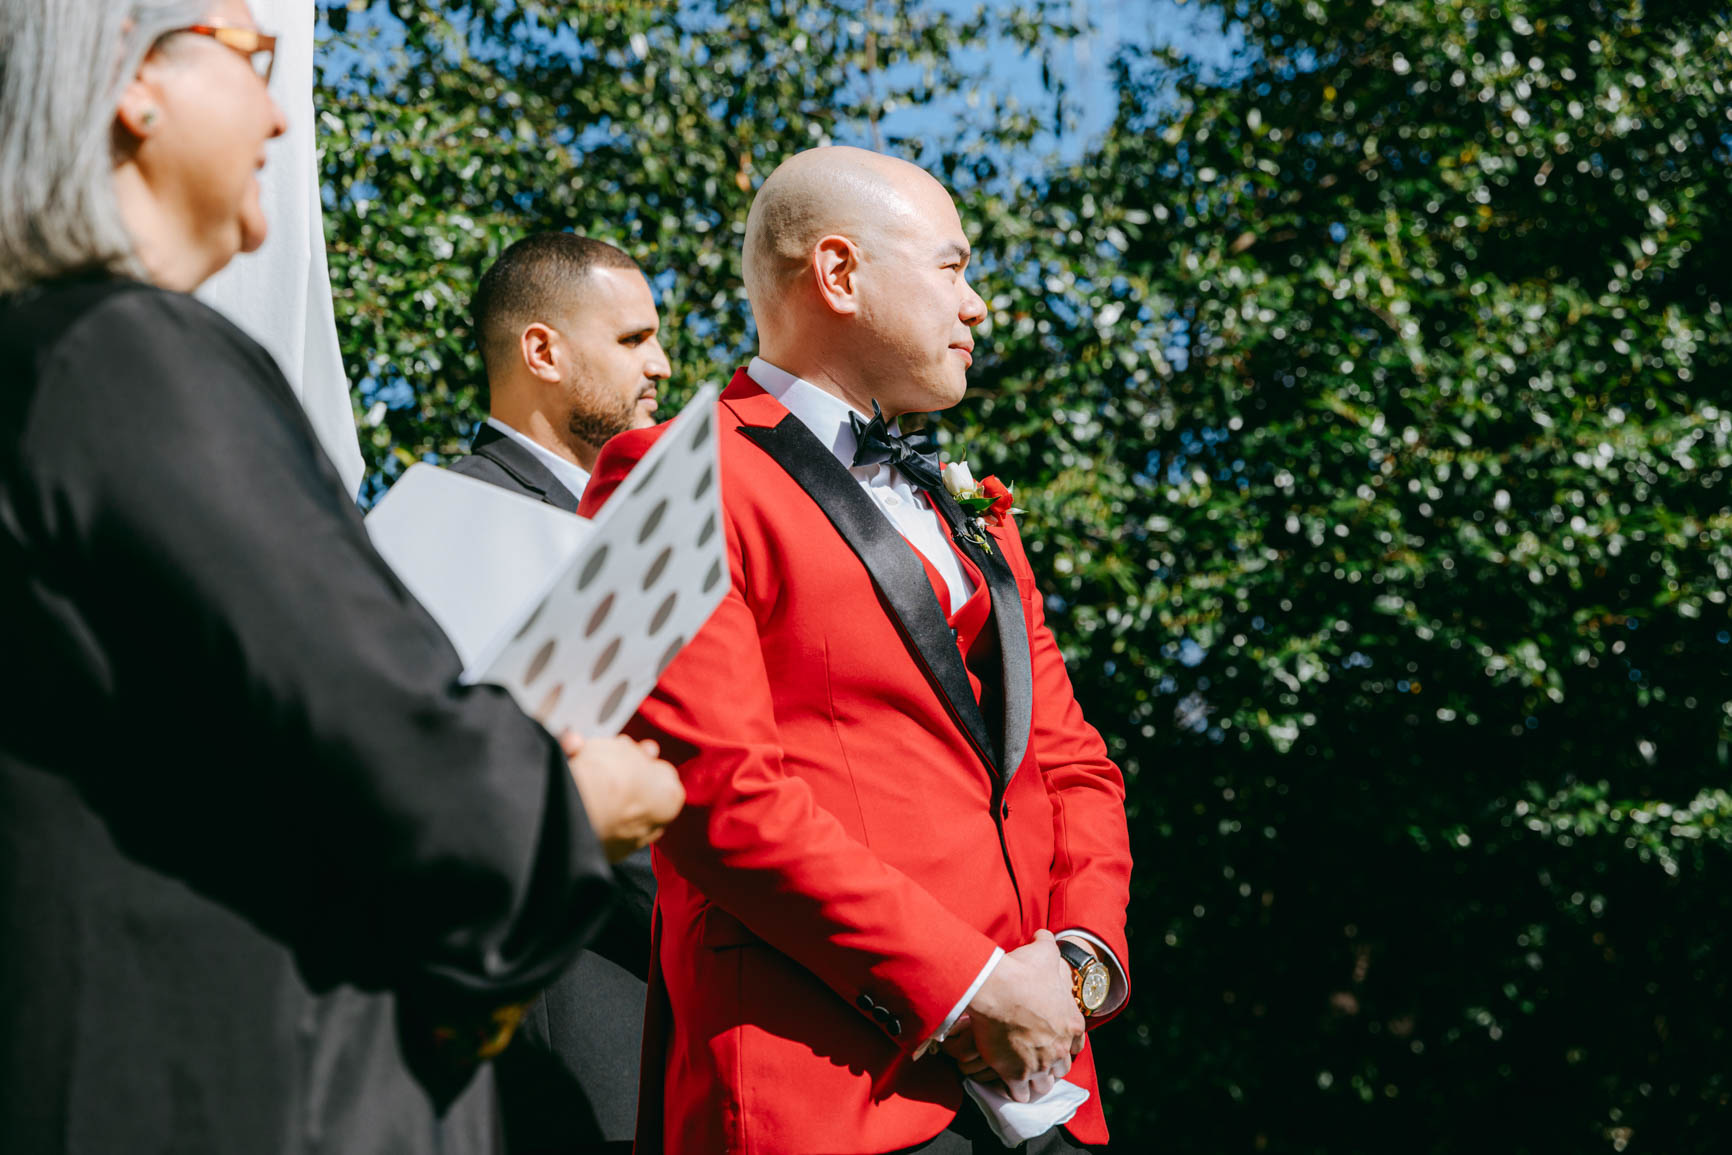 groom seeing bride for the first time at Separk Mansion in Gastonia NC shot by Nhieu Tang Photography | nhieutang.com